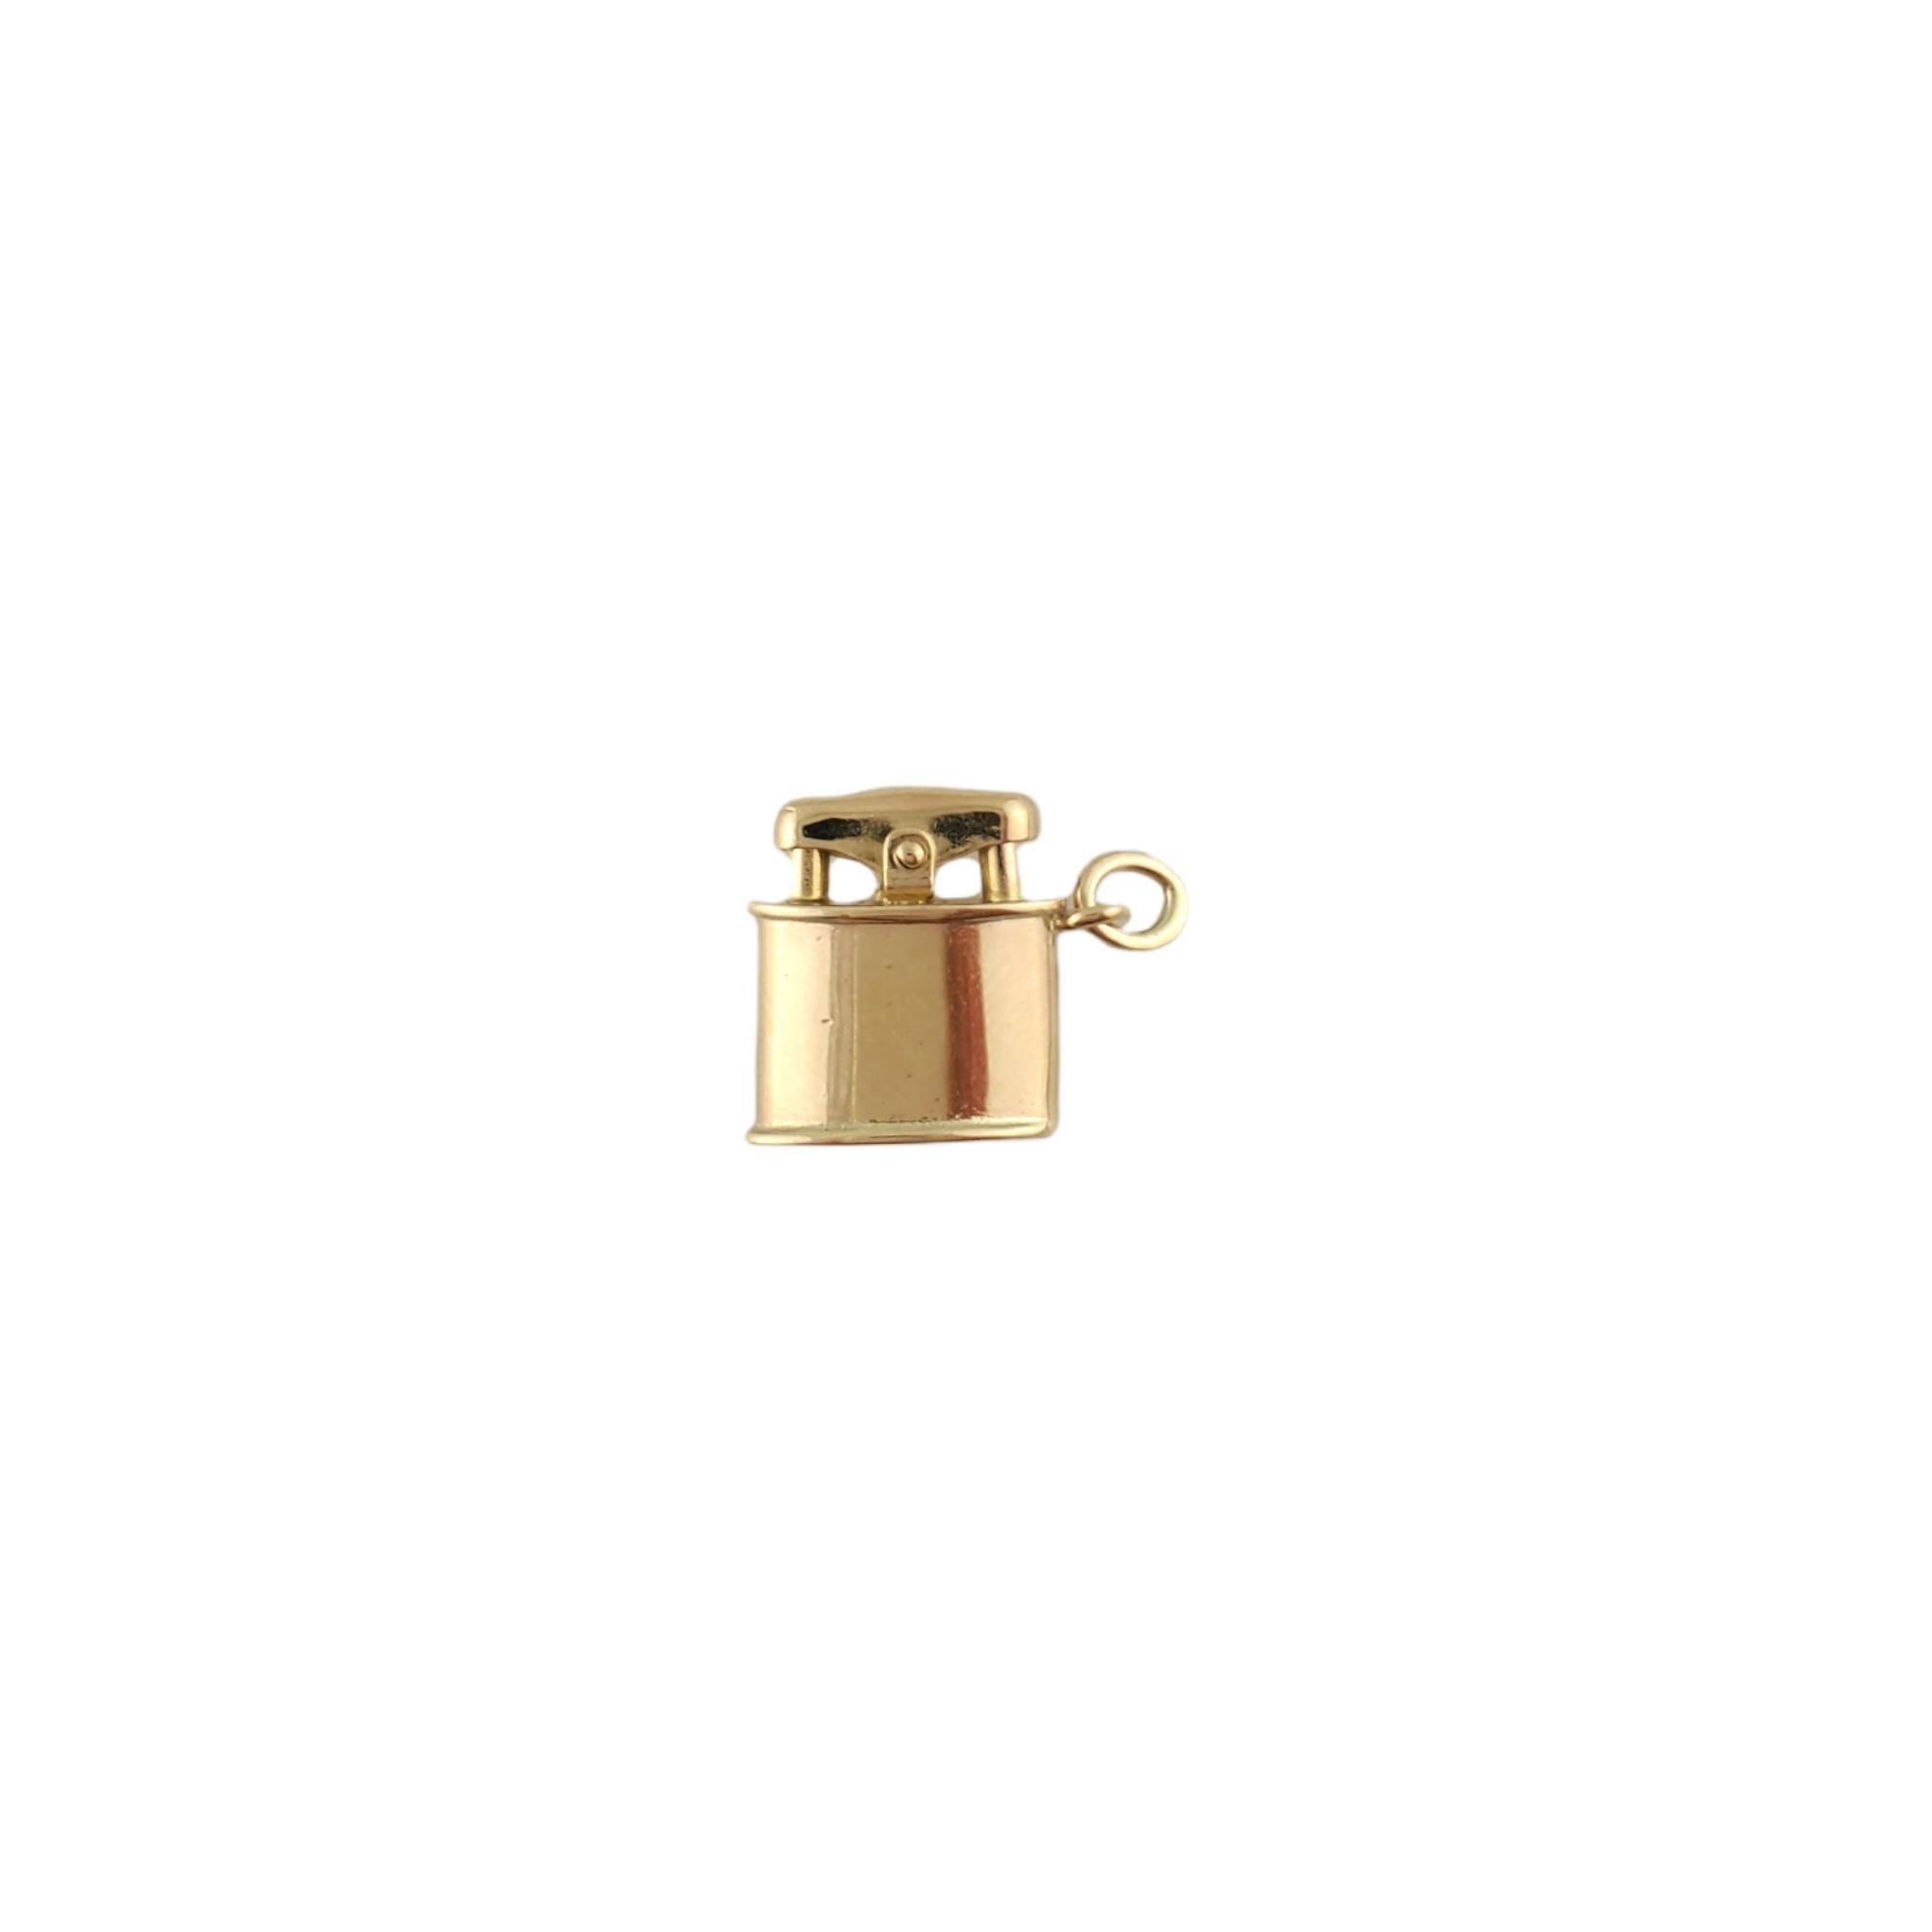 14K Yellow Gold Lighter Charm

This piece features a beautifully crafted 14K yellow gold lighter charm with an articulating switch.

Size: 12.54 mm X 14.05 mm

Weight: 1.8 g/1.1 dwt

Hallmark: 14K

Very good condition, professionally polished.

Will